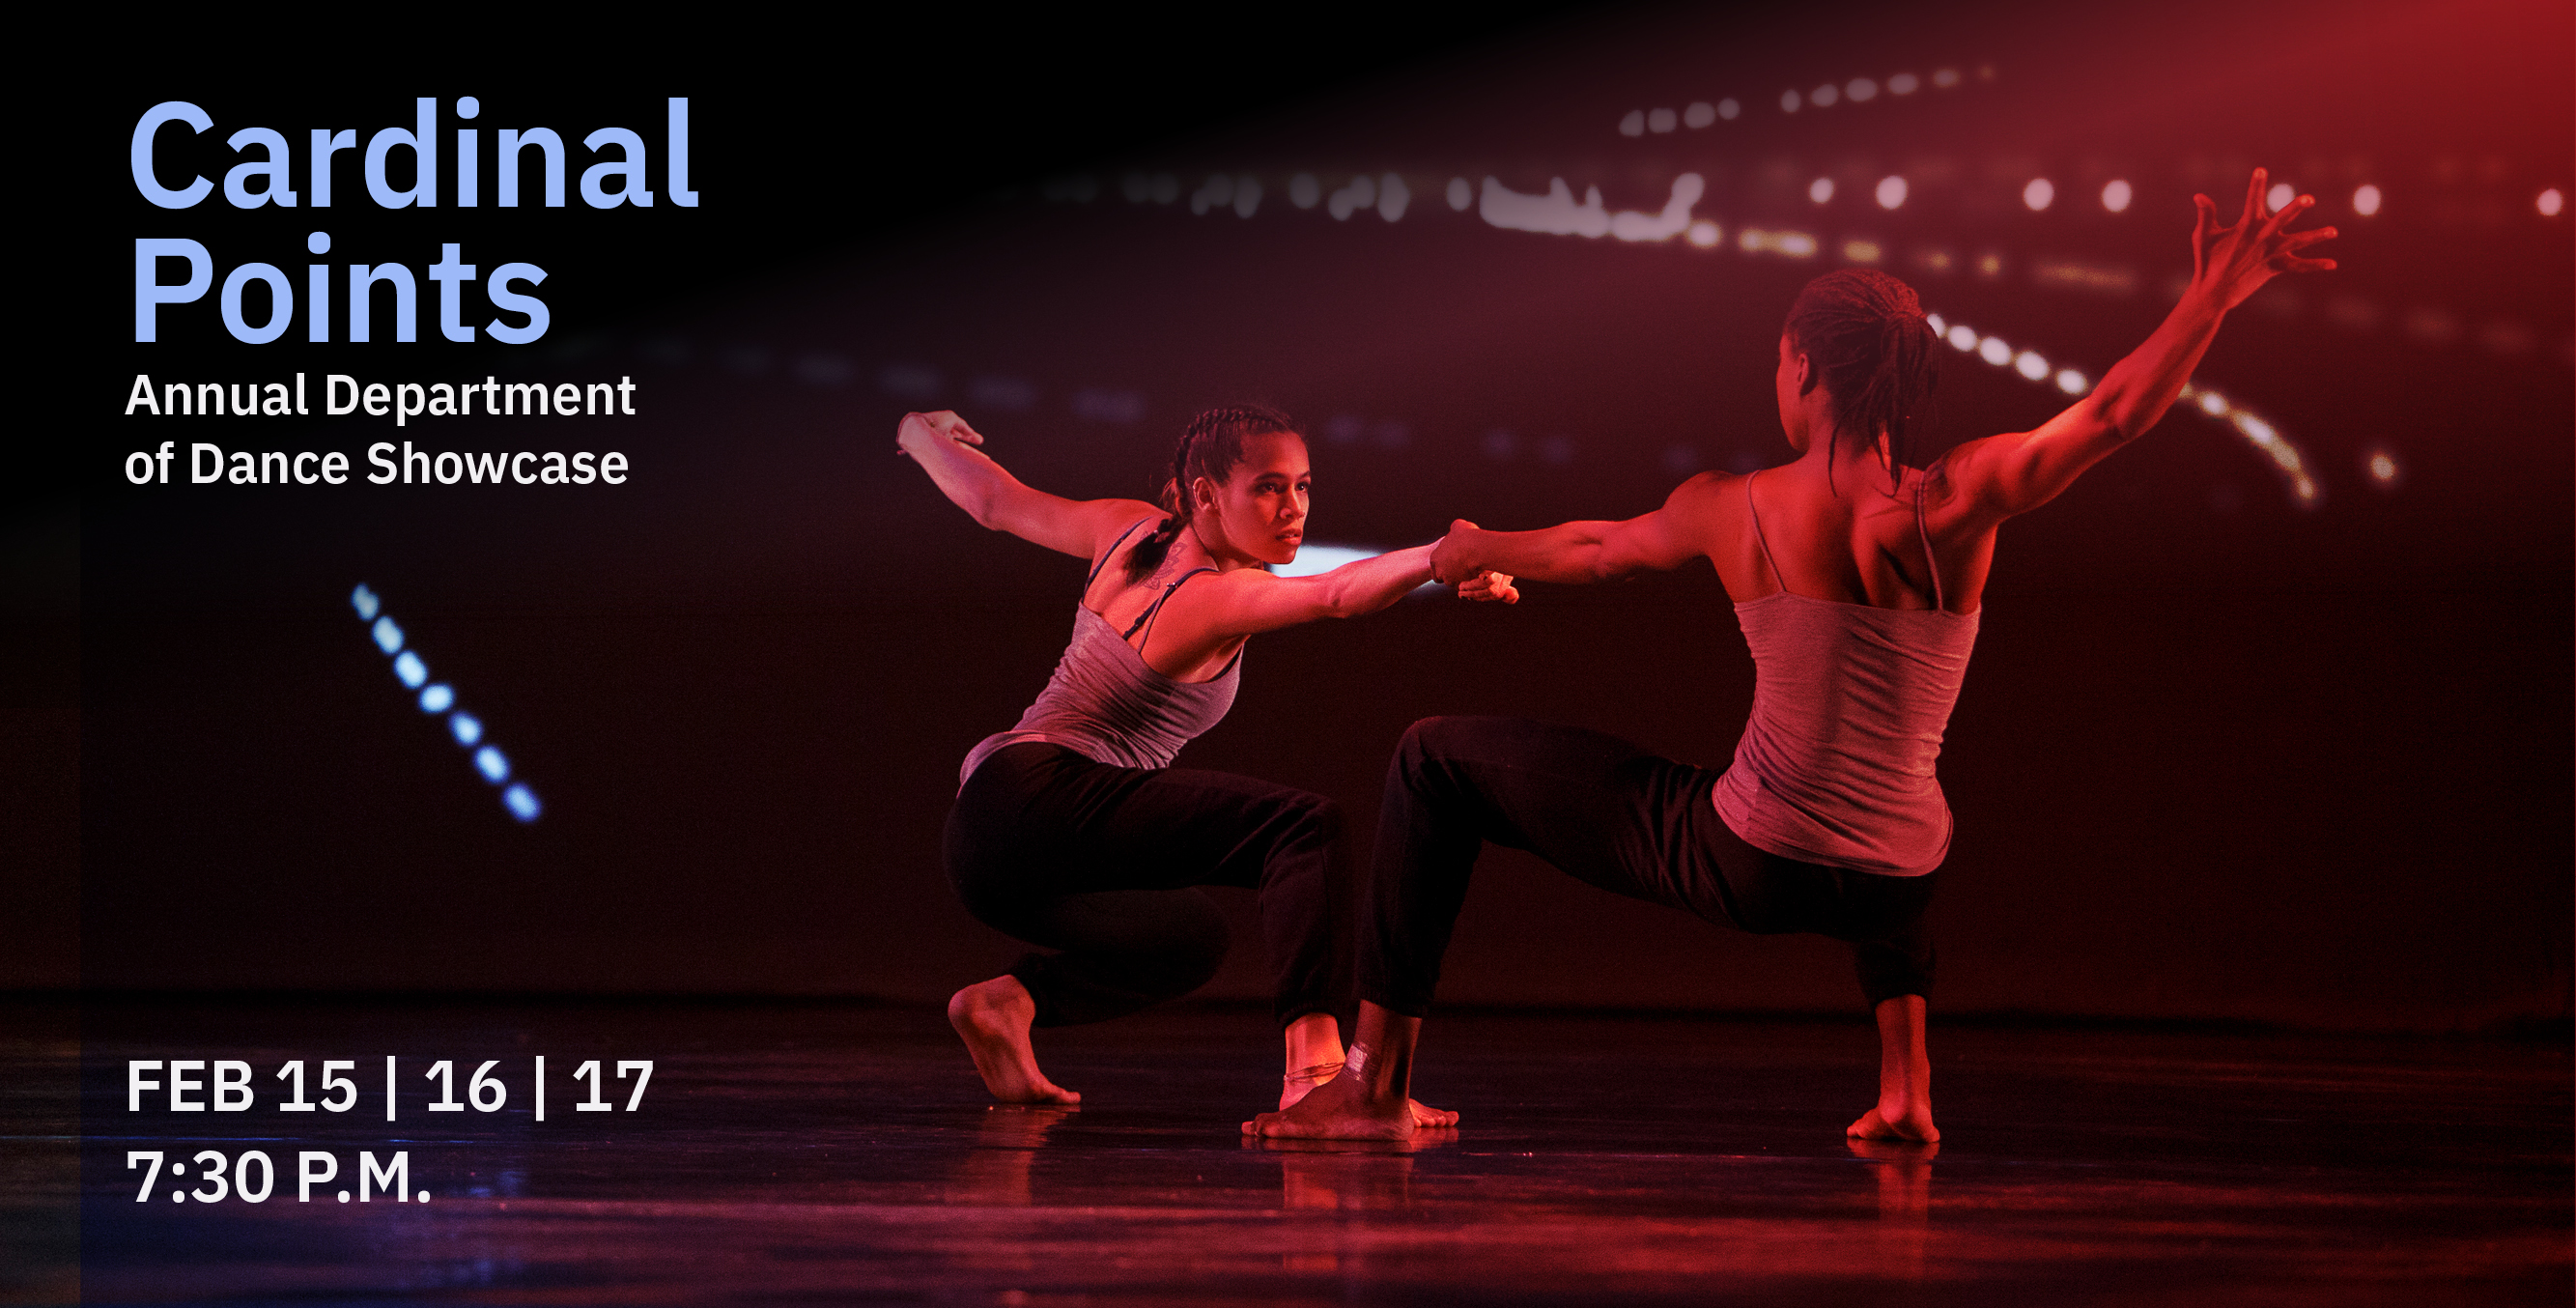 Cardinal Points - Annual Department of Dance Showcase